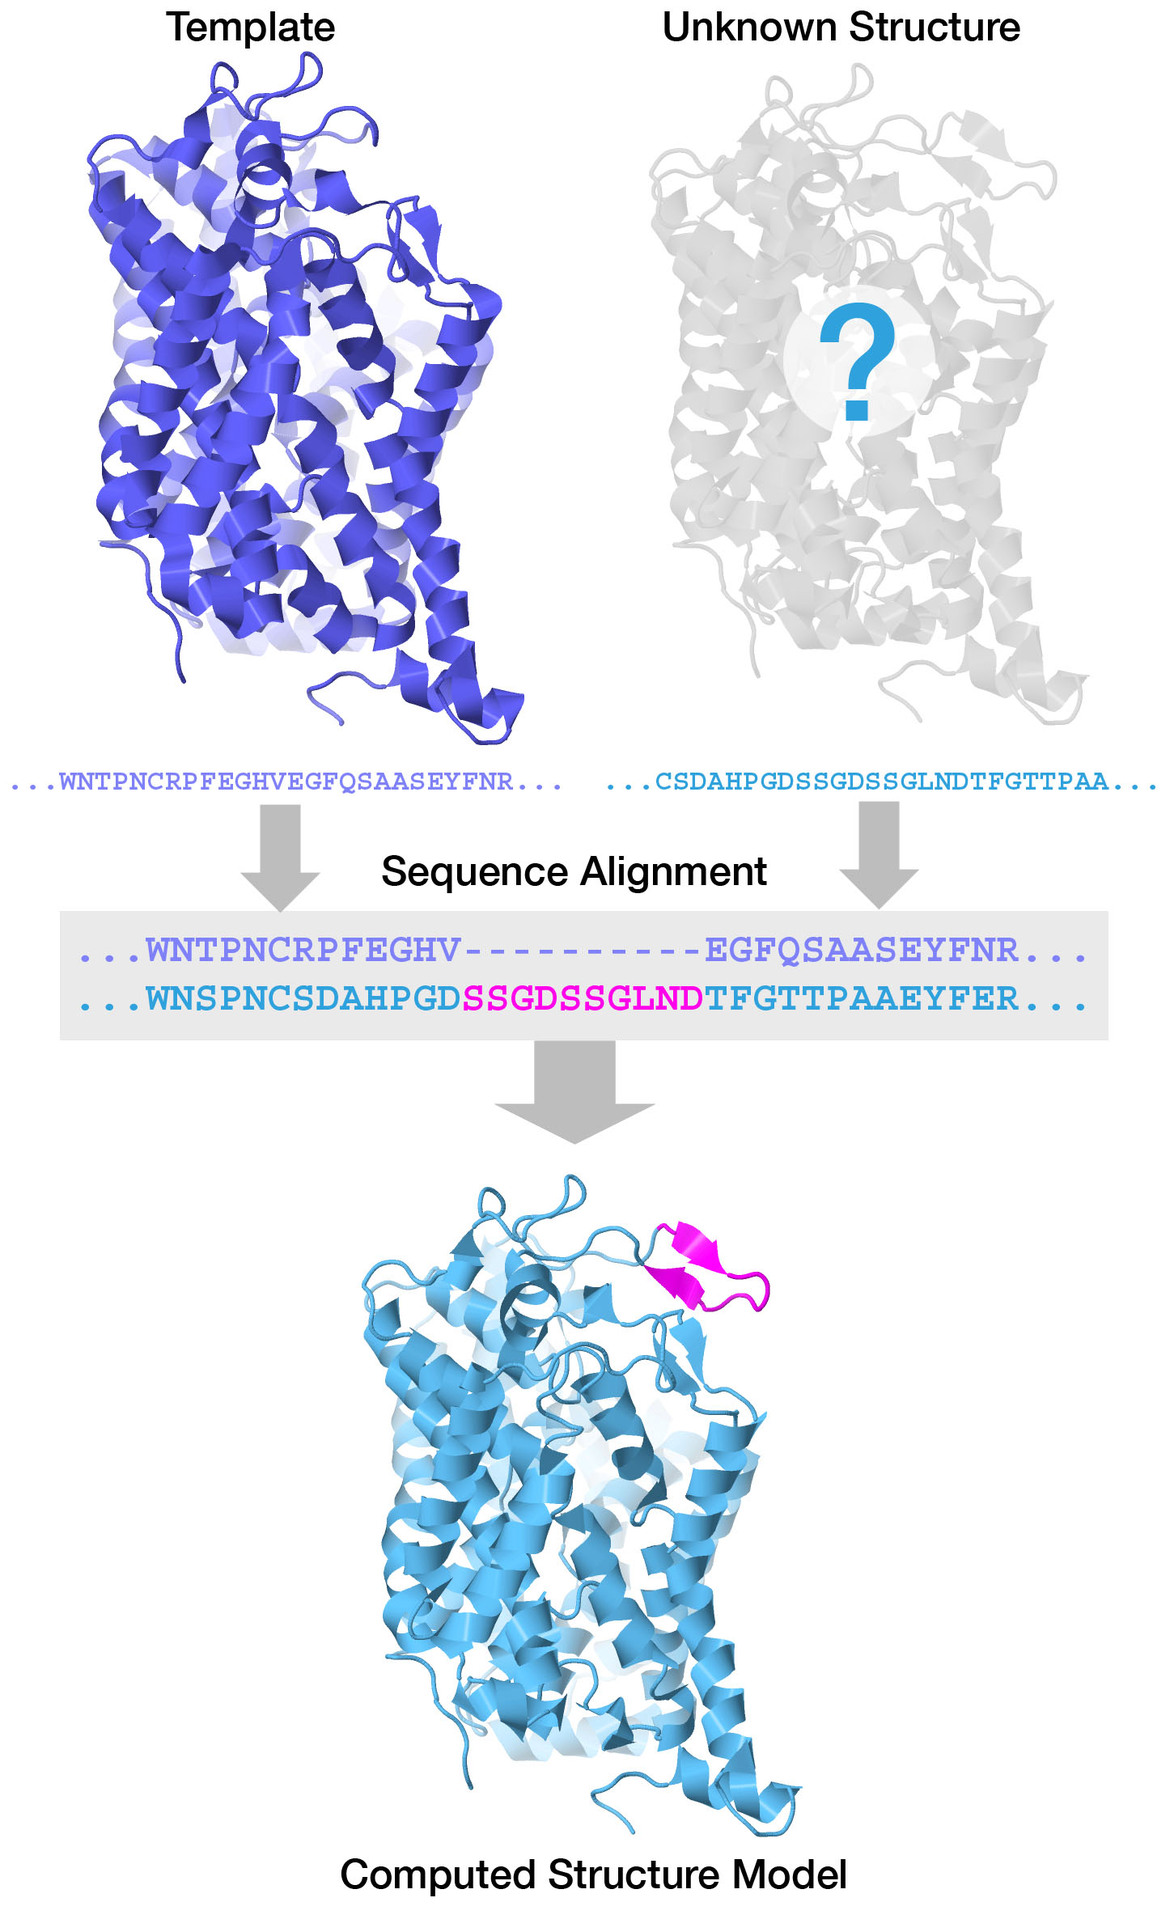 Figure 1: Experimentally-determined structures may be used as modeling templates or scaffolds to predict structures of proteins with similar sequences. Here, the crystallographic structure of the dopamine transporter from fruit flies (upper left, PDB ID 4xp4) is used as a template to model the human protein. The sequence has 55% sequence identity with the human protein, but the sequence alignment reveals that one loop of the human protein is 10 amino acids longer than in fruit flies. The CSM of the human protein (bottom), generated by homology modeling at Swiss-Model, is very similar to the fruit fly protein, and includes modeled coordinates for this loop (magenta).